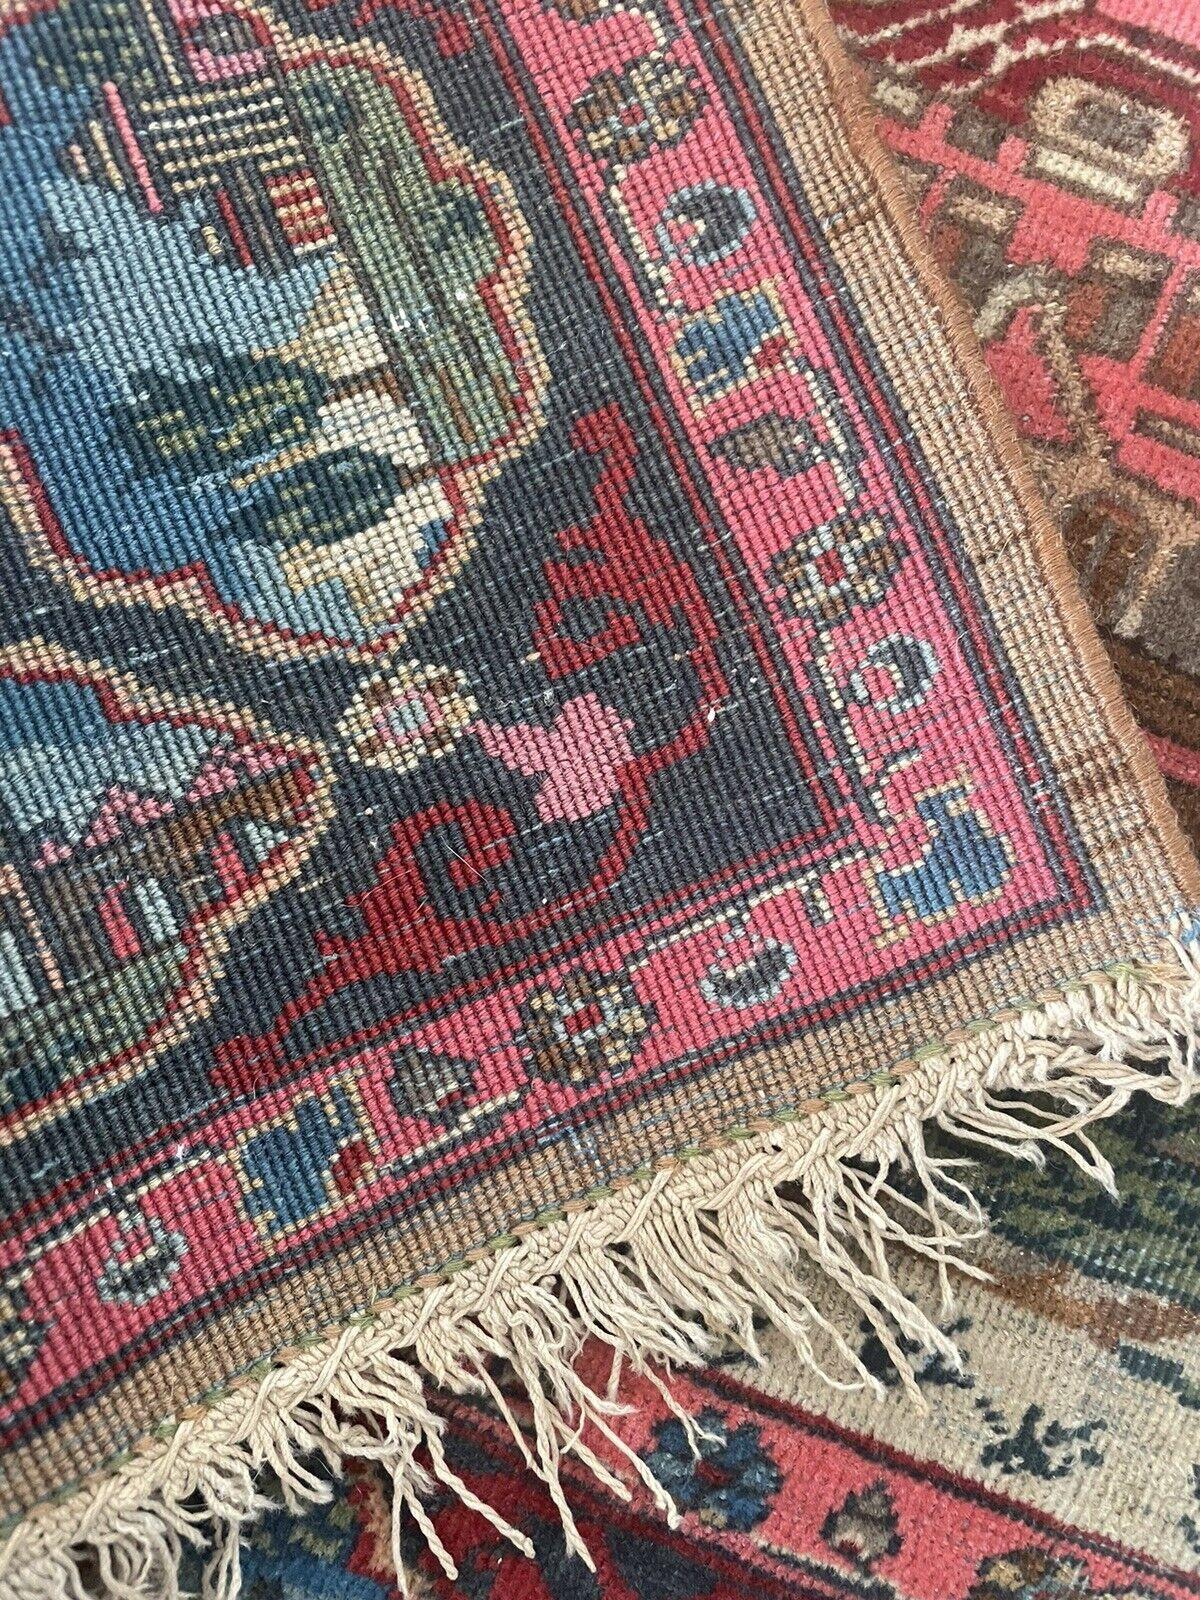 Handmade Antique Persian Kashan Collectible Rug 1.6' x 2.4, 1880s - 1N09 For Sale 4